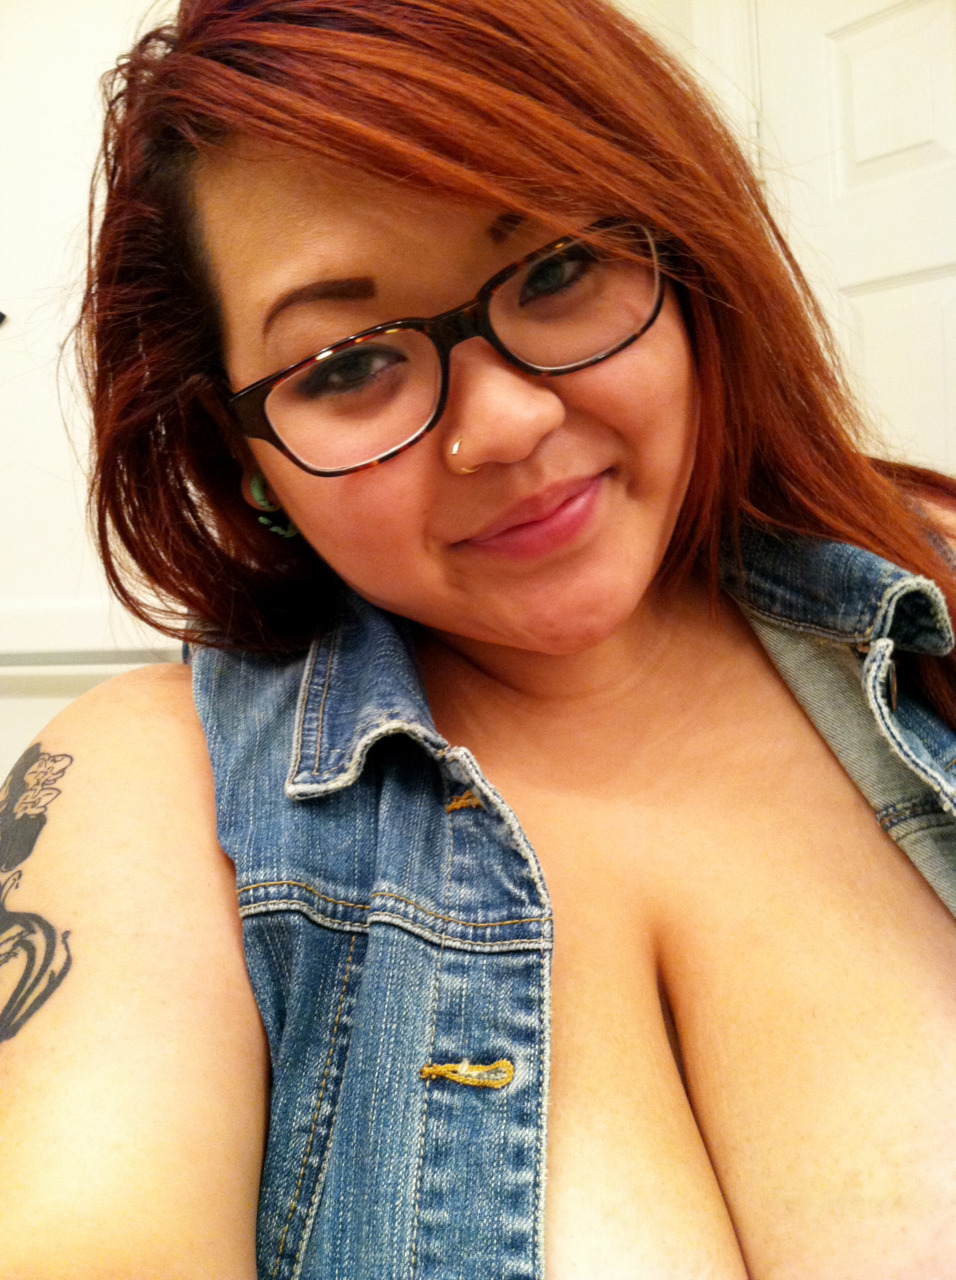 Thisisroy – Ohreinababyy – What A Ginger – Damn Gingers Wit Their Cute Asian Faces Impeccable Curves Mesmerizing Eyes An…2